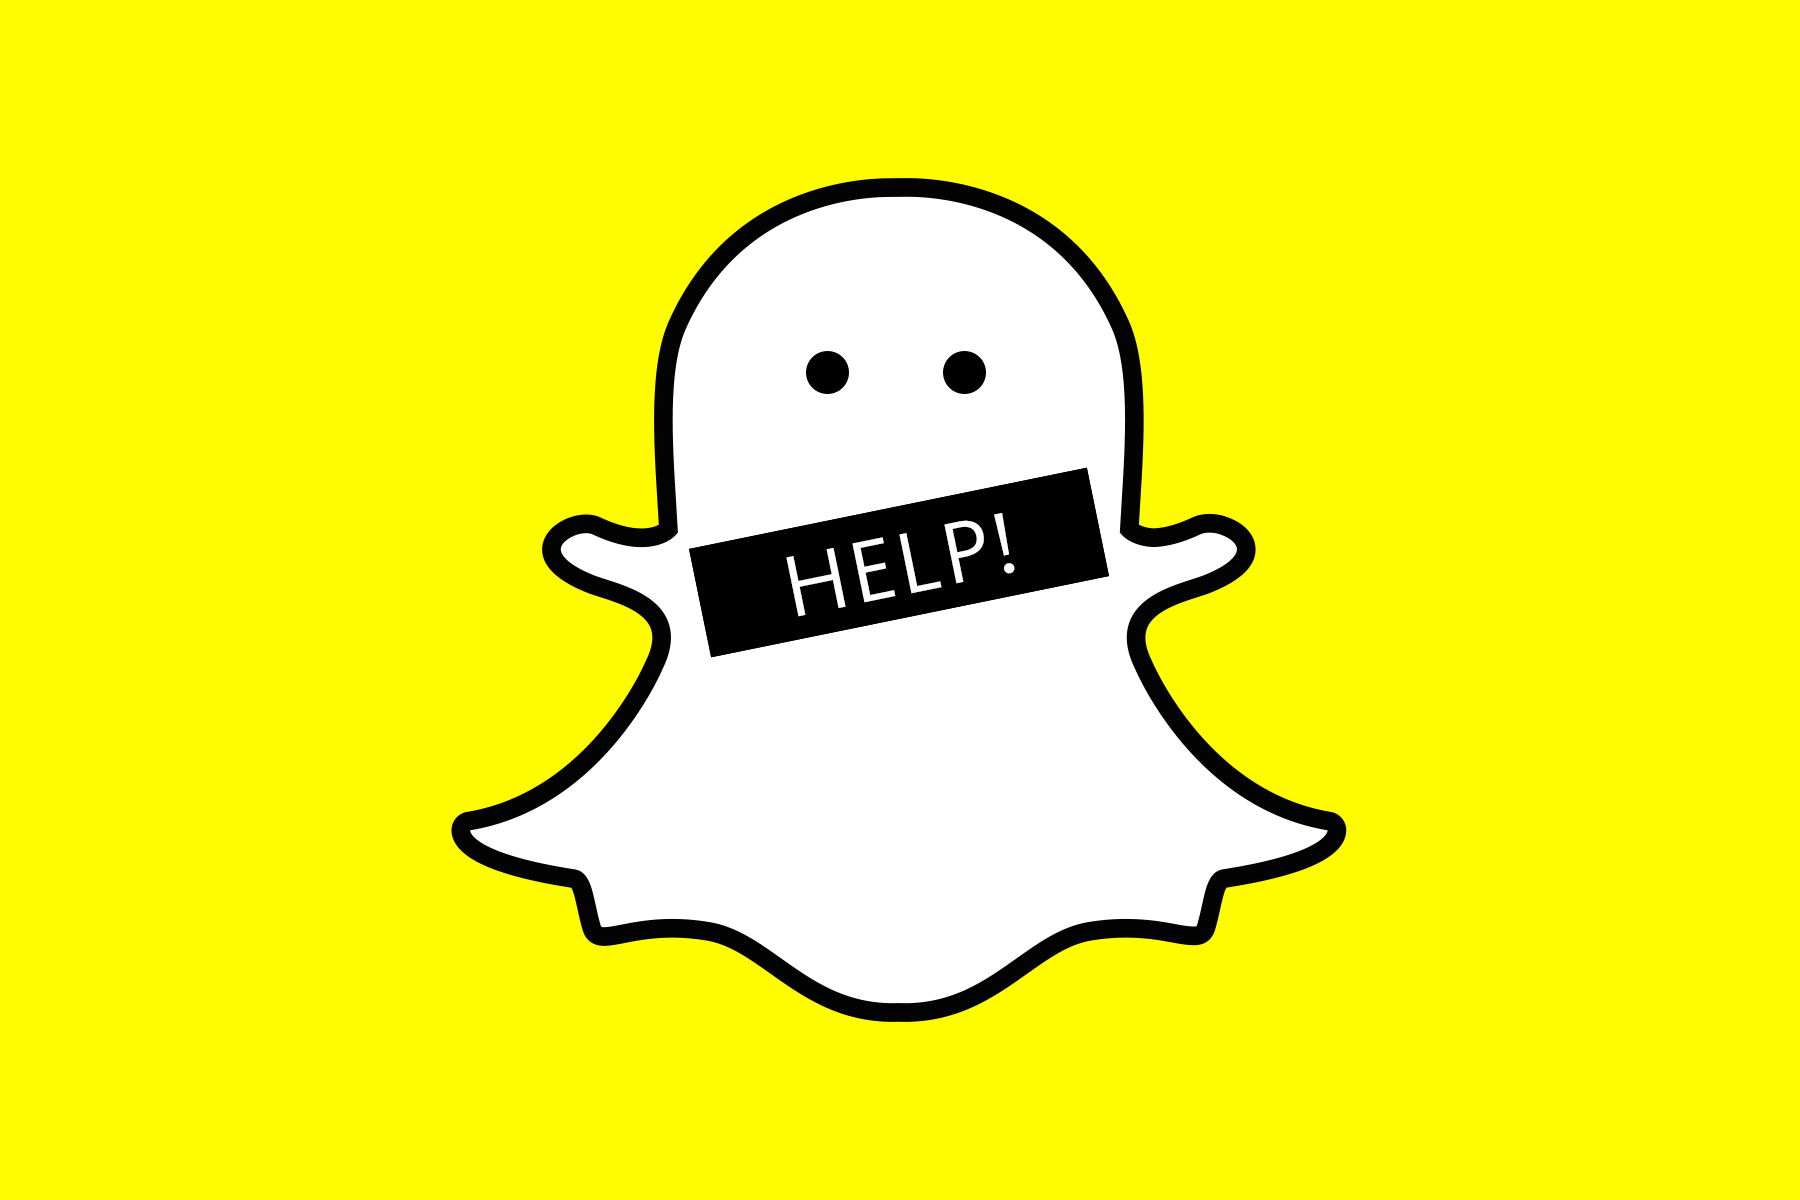 snapchat download for mac